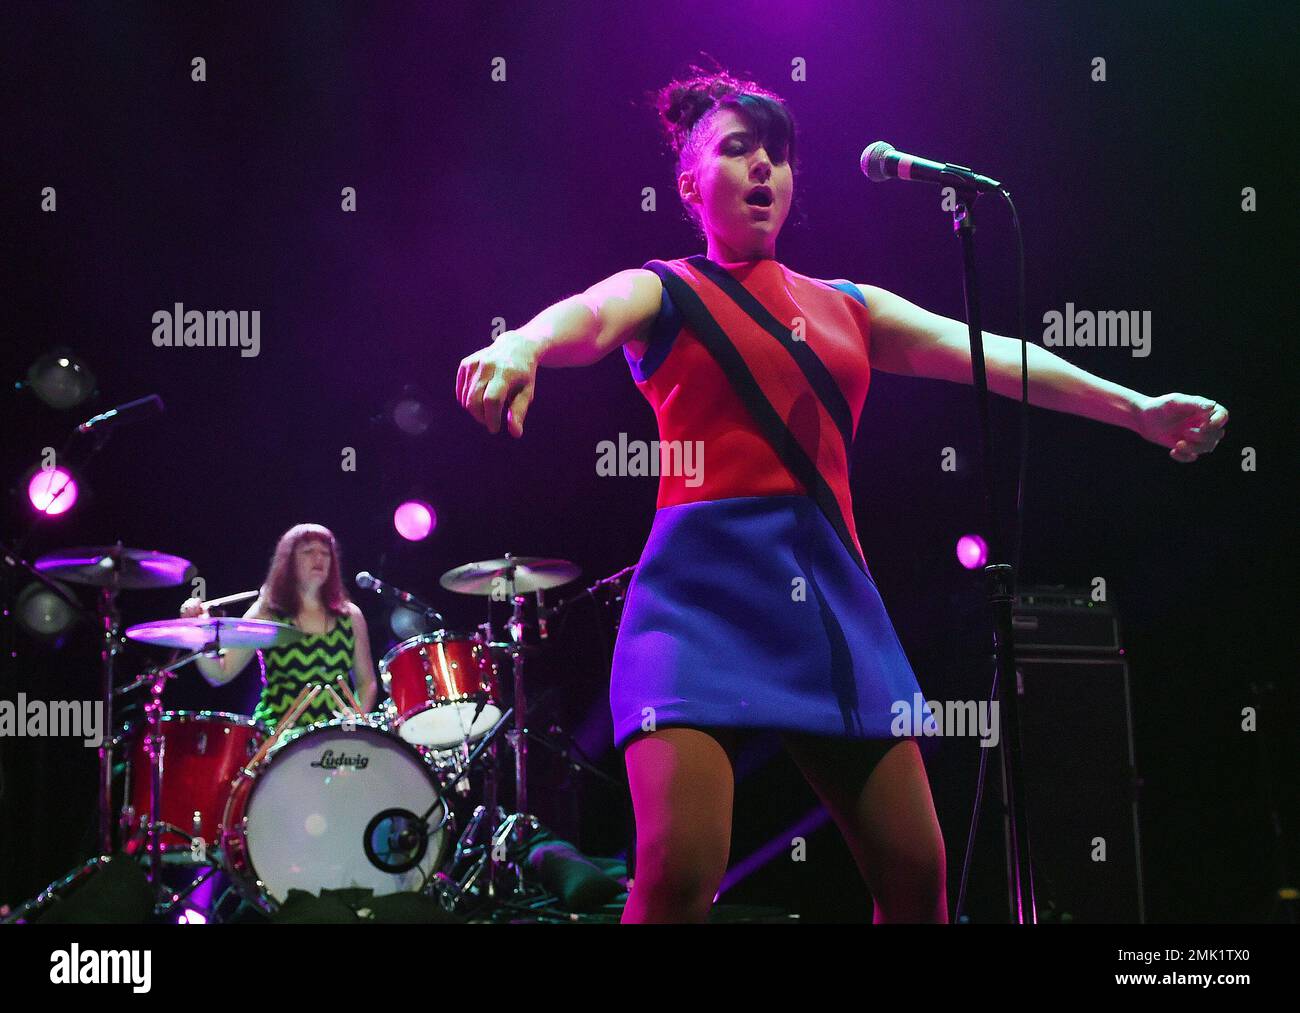 Drummer Tobi Vail of the punk rock band Bikini Kill performs at the  Hollywood Palladium, Thursday, May 2, 2019, in Los Angeles. The 2019 tour  marks the band's first live shows in